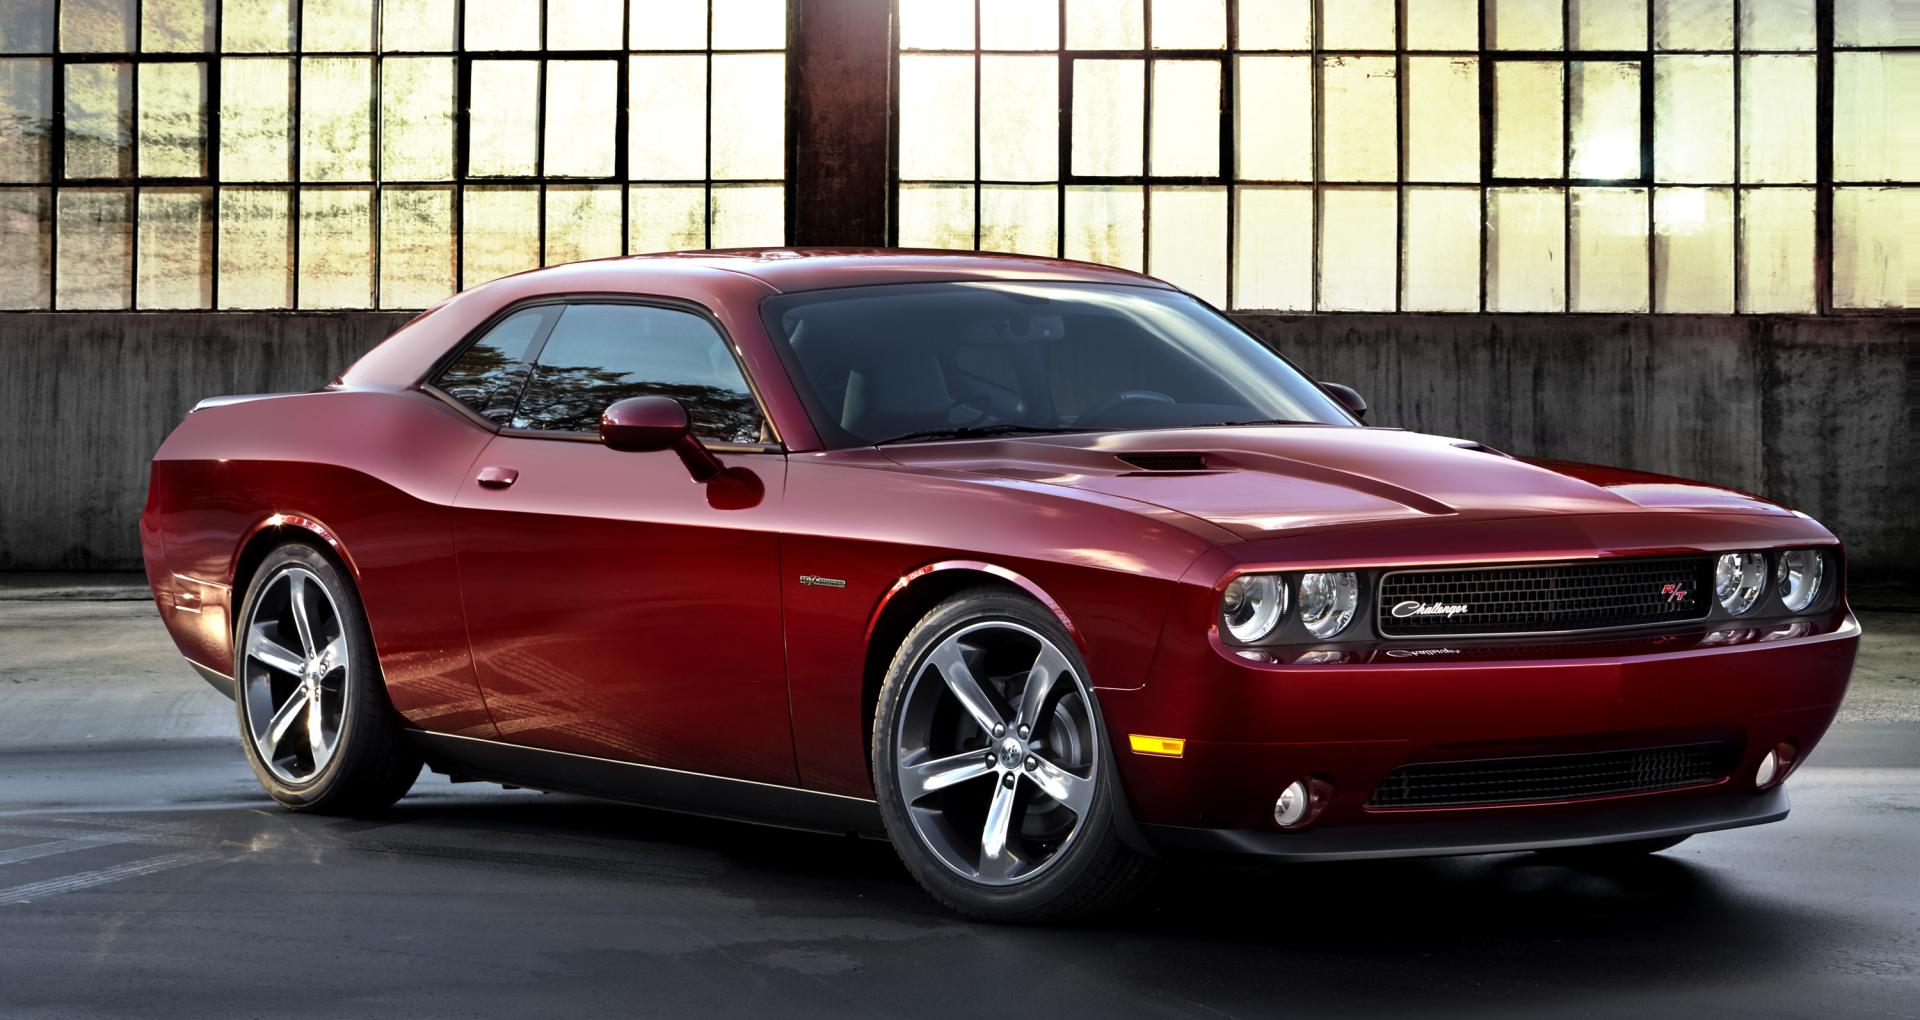 2014 Dodge Challenger 100th Anniversary Edition News and Information